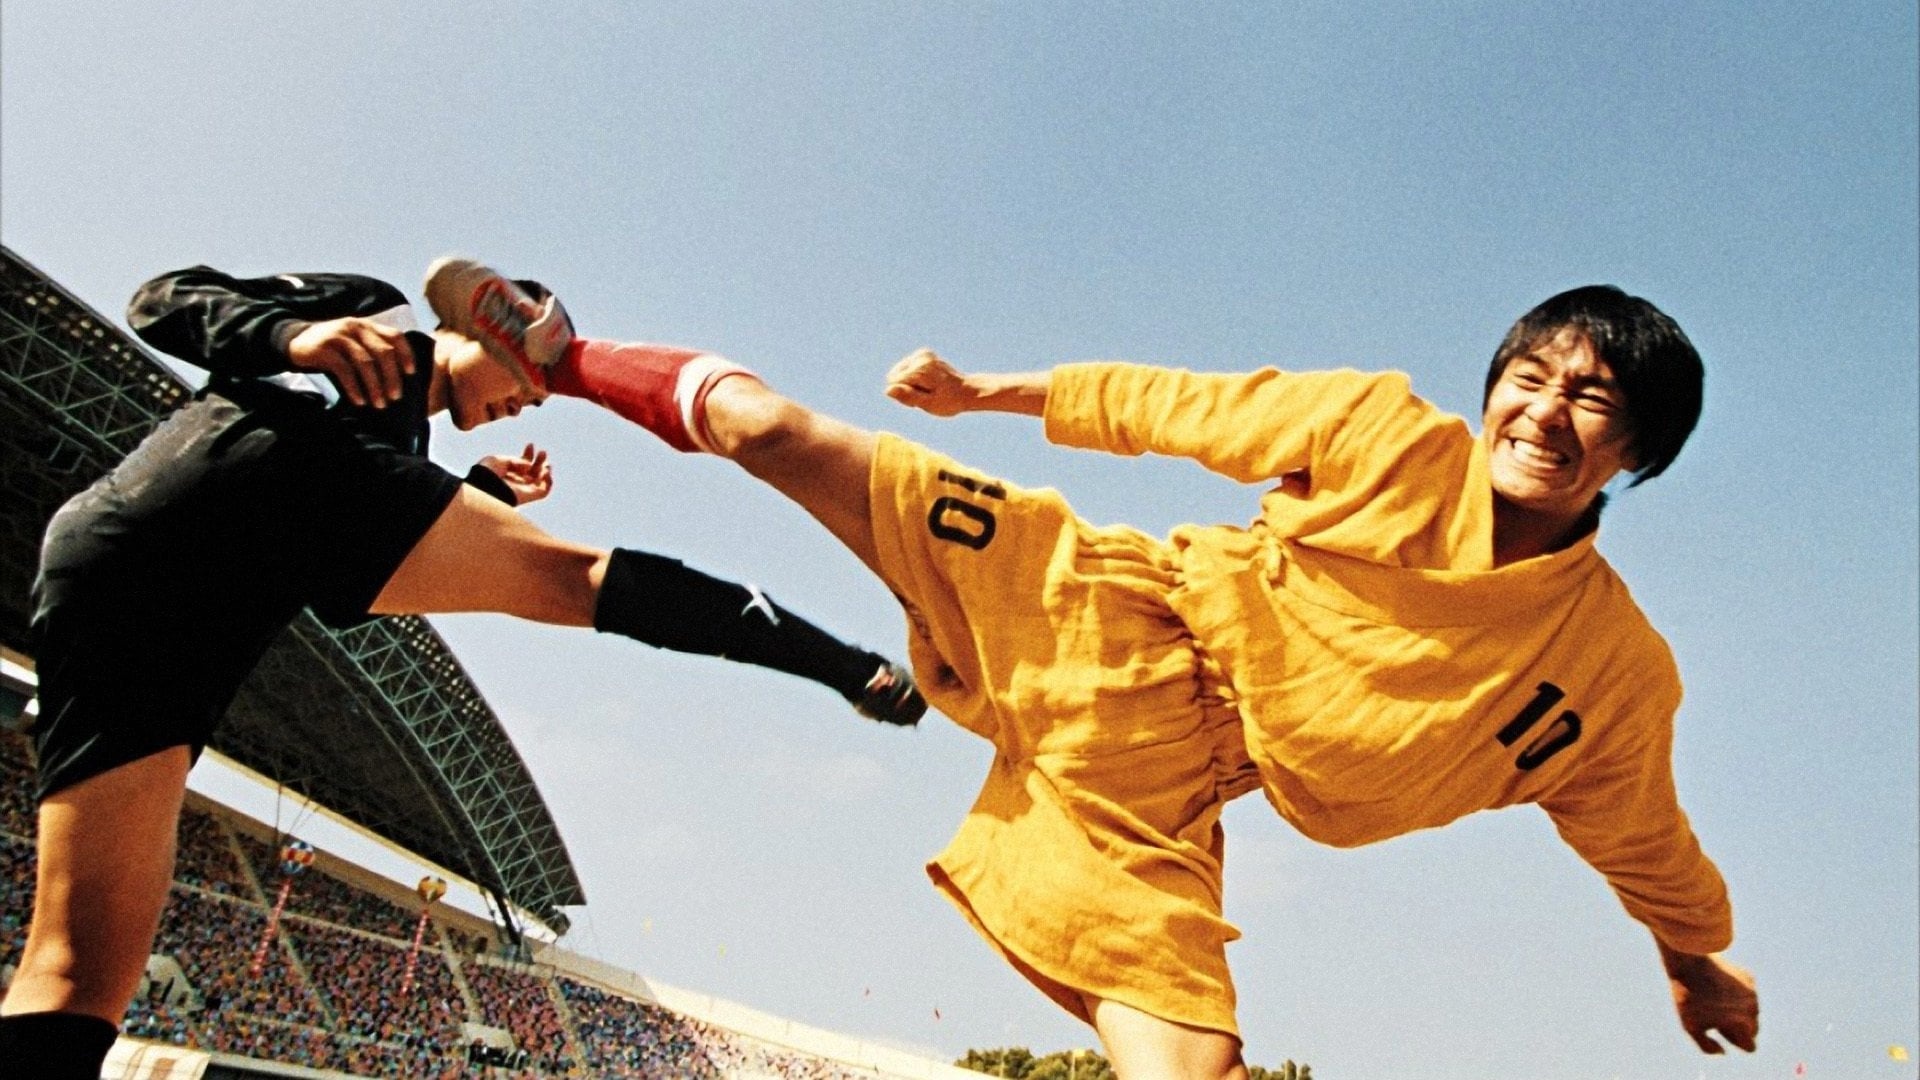 Shaolin Soccer: The movie has been directed and co-written by Stephen Chow, who stars as Sing. 1920x1080 Full HD Background.